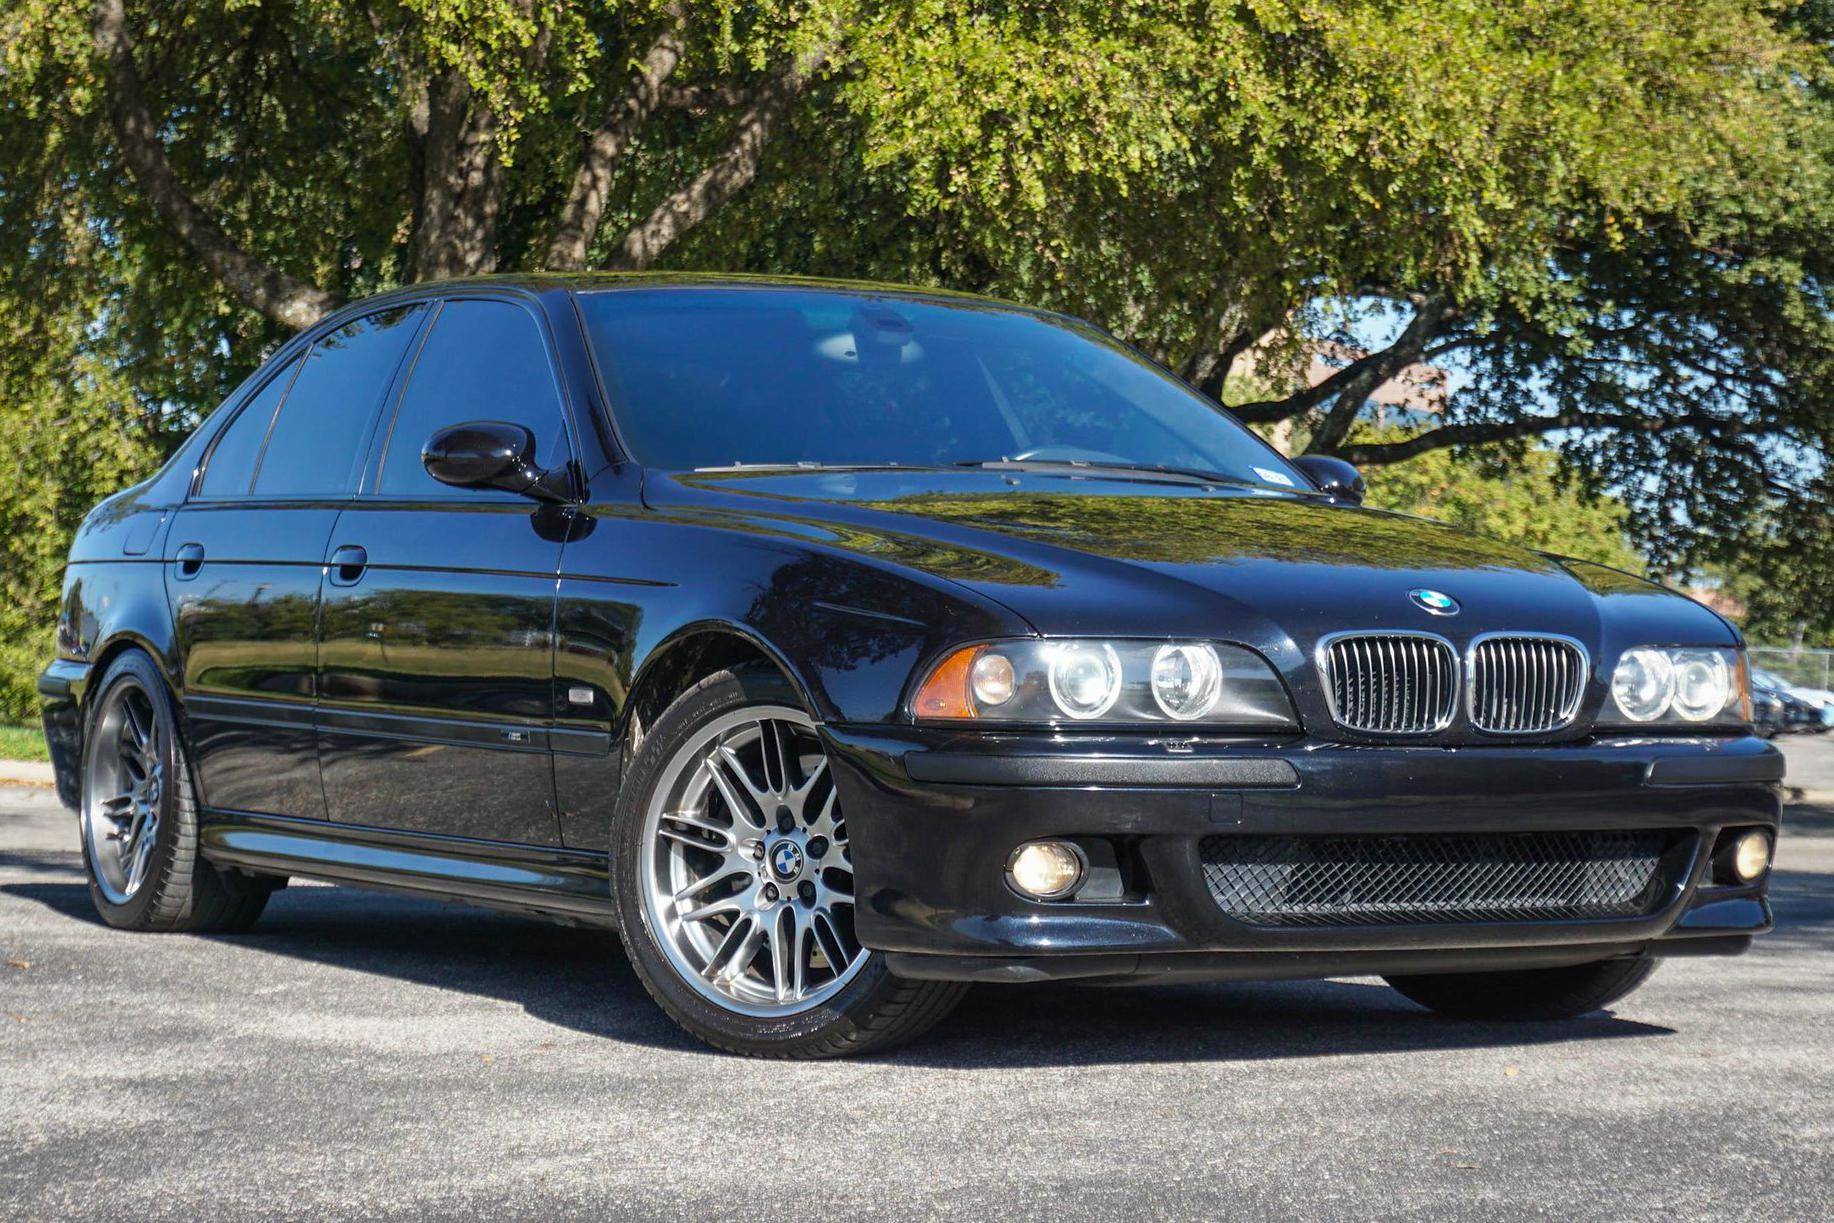 There's A Brand New 2003 BMW M5 With Just 309 Miles Up For Sale